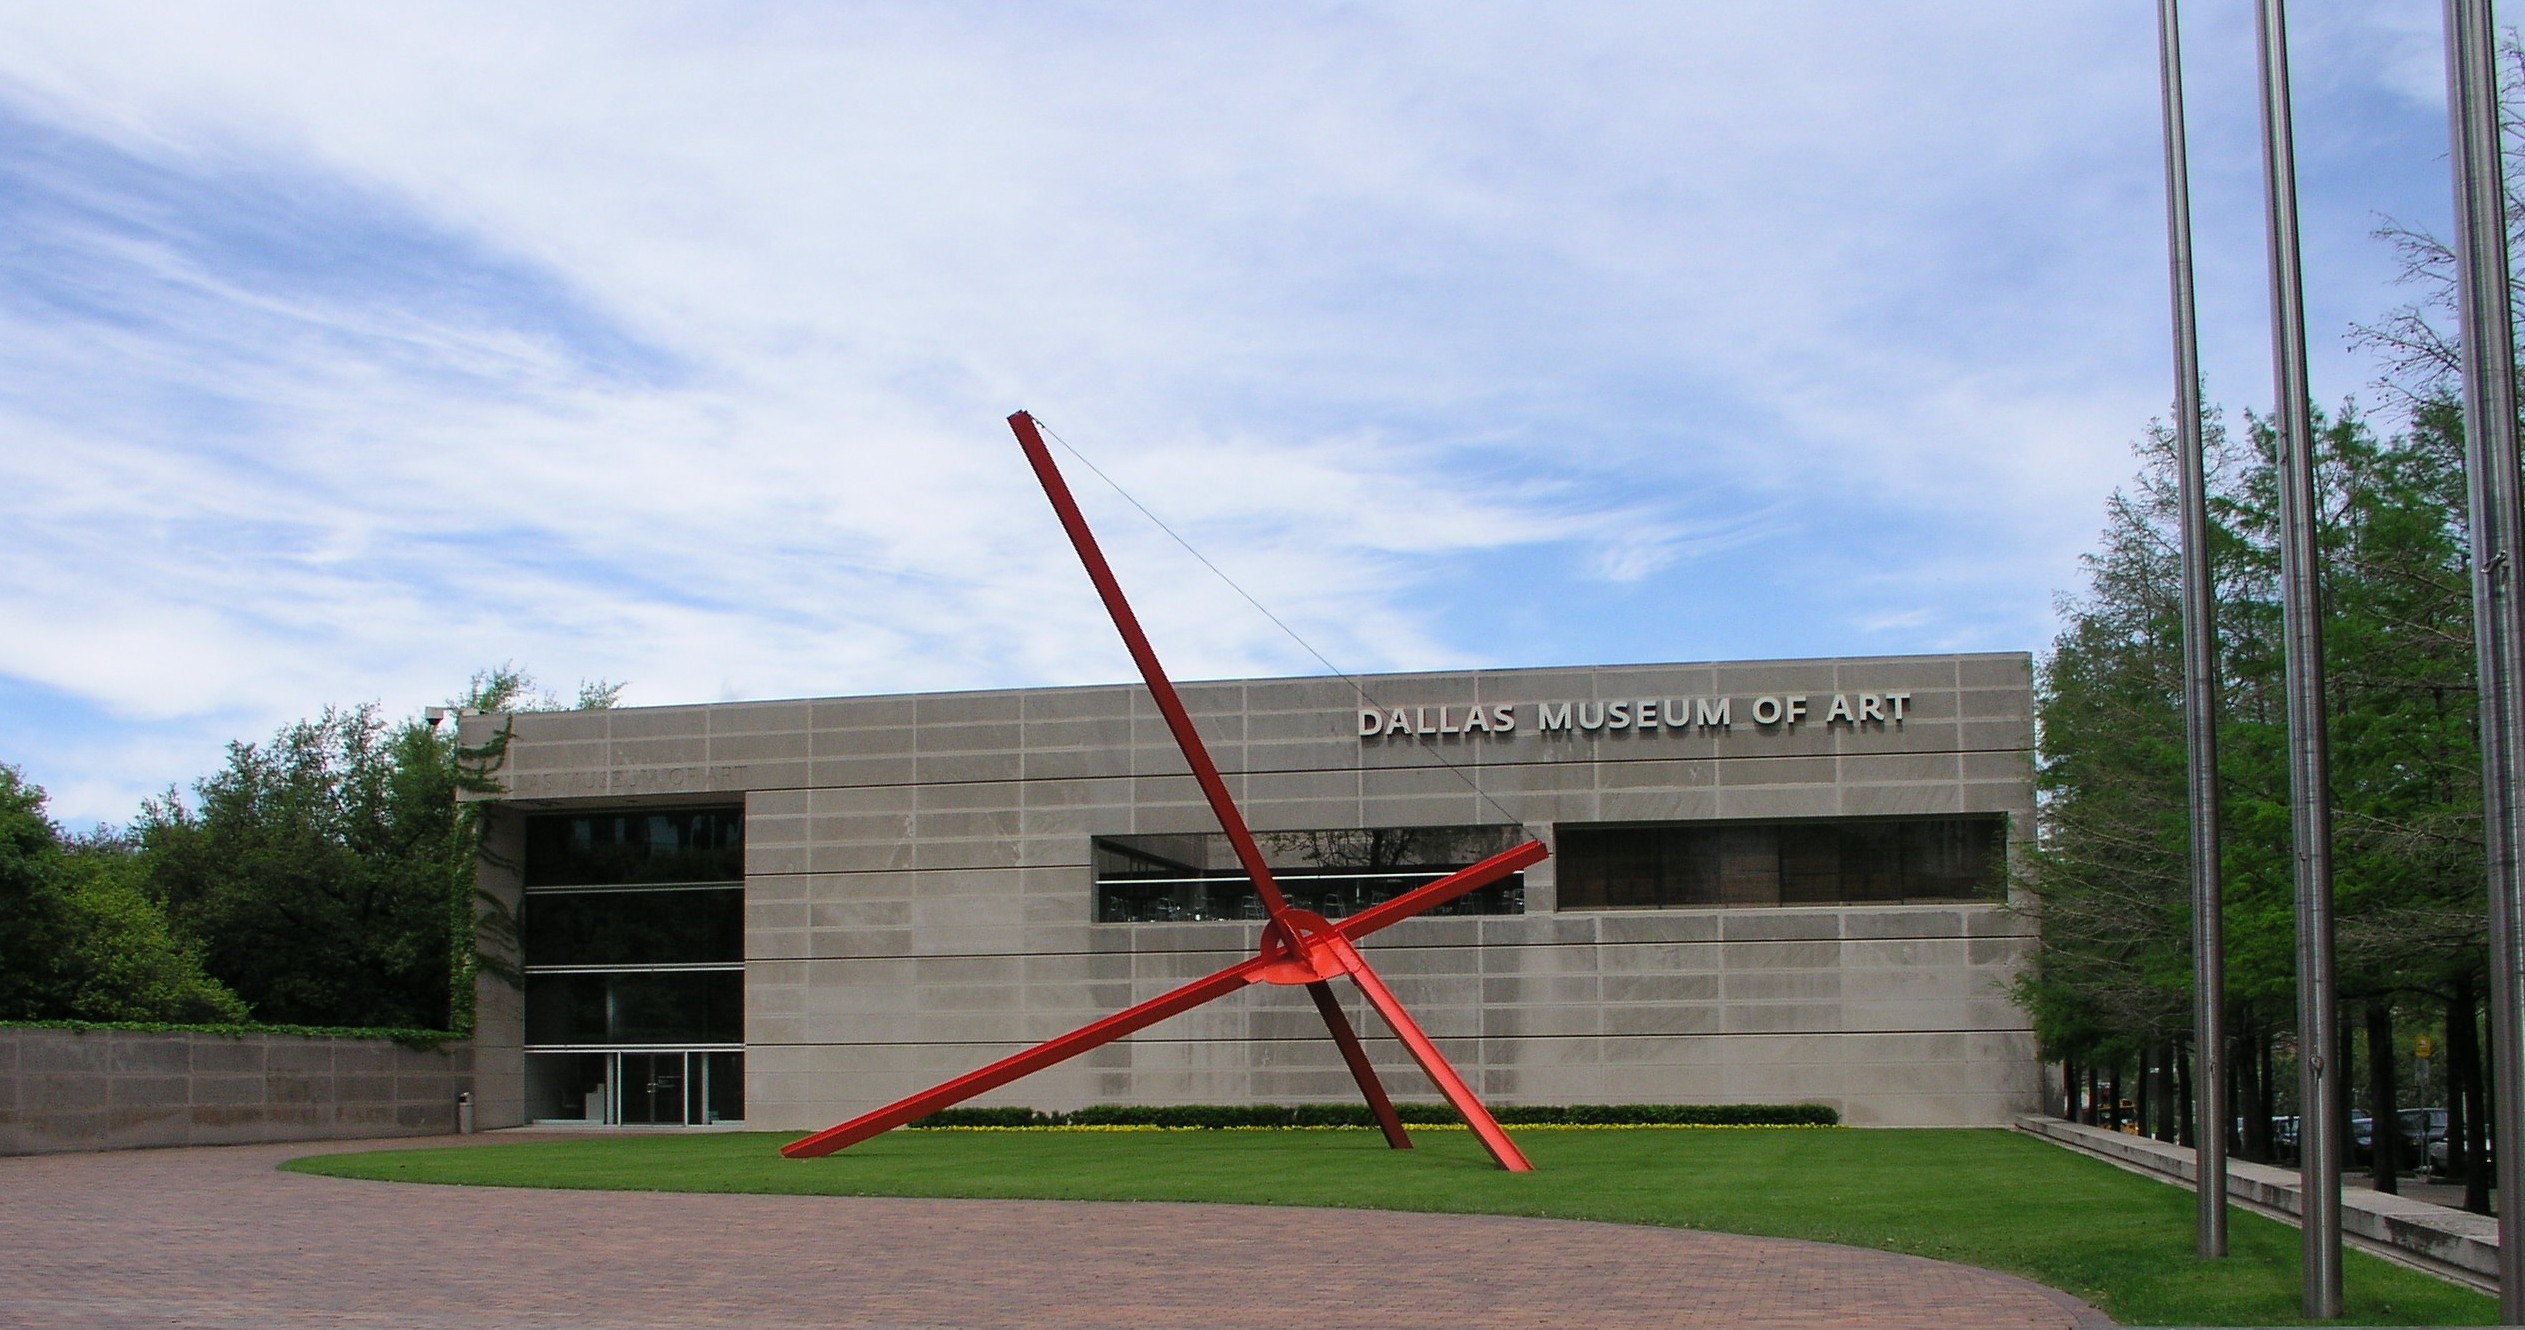 Dallas Museum of Art, red artwork in the garden, green trees